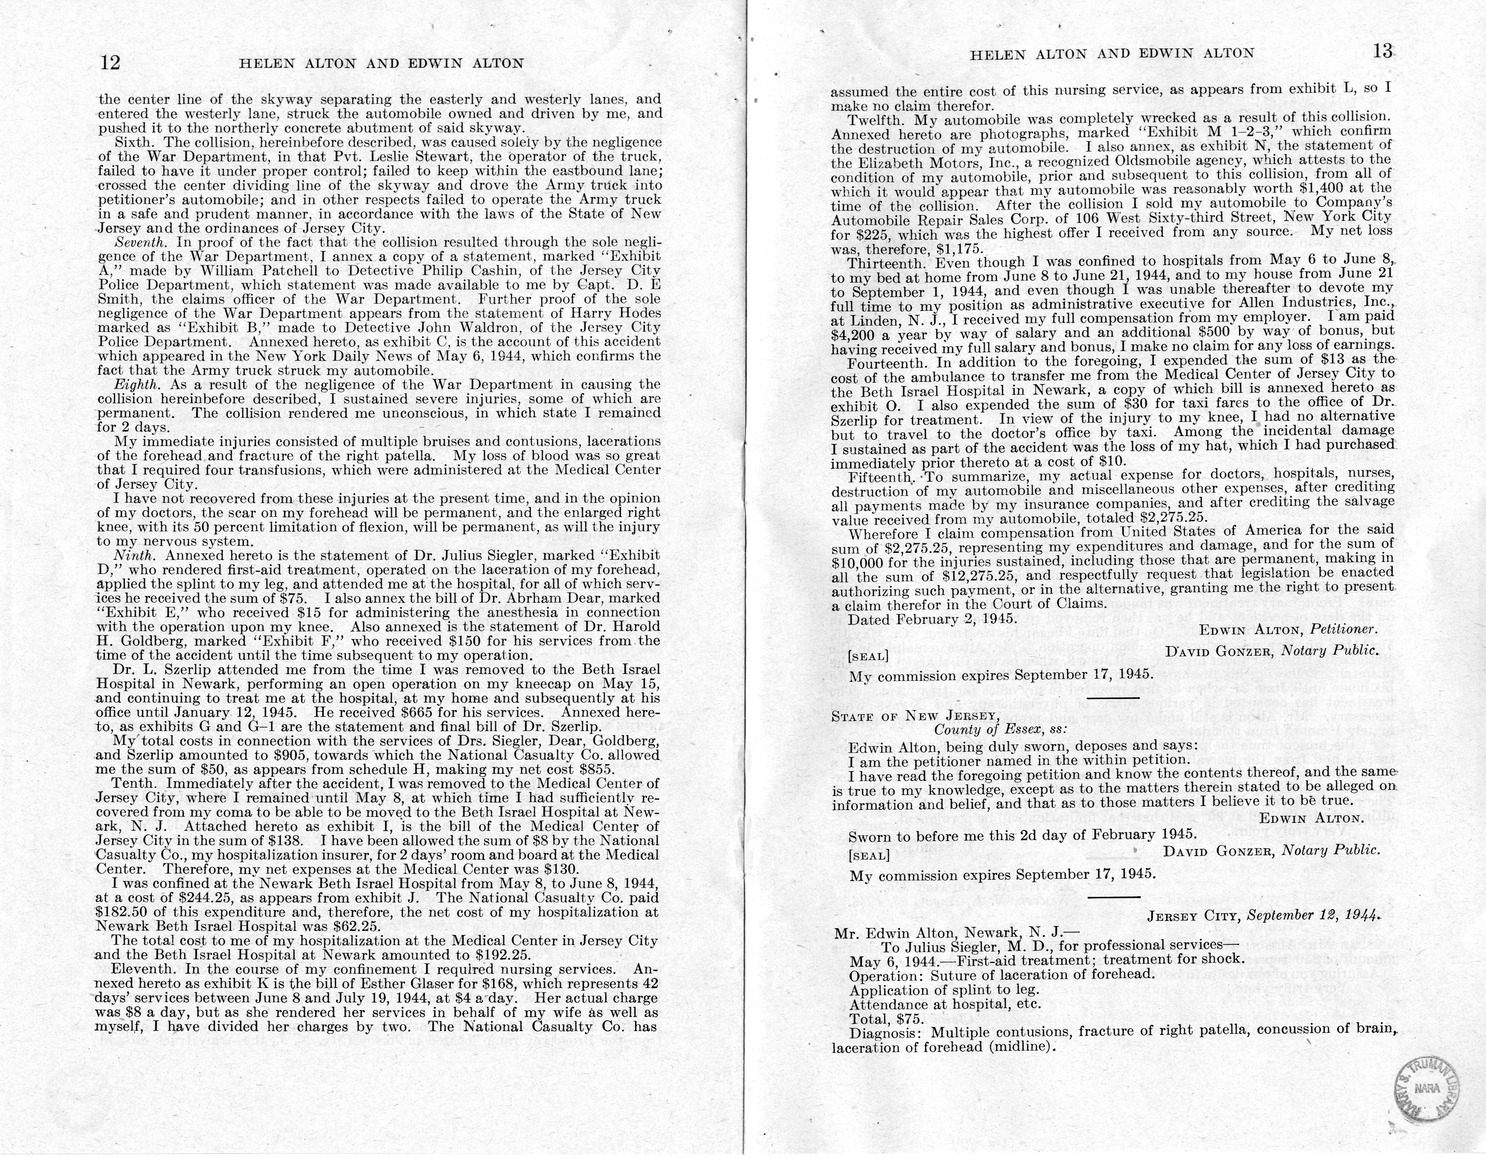 Memorandum from Frederick J. Bailey to M. C. Latta, H.R. 2512, For the Relief of Helen Alton and Edwin Alton, with Attachments